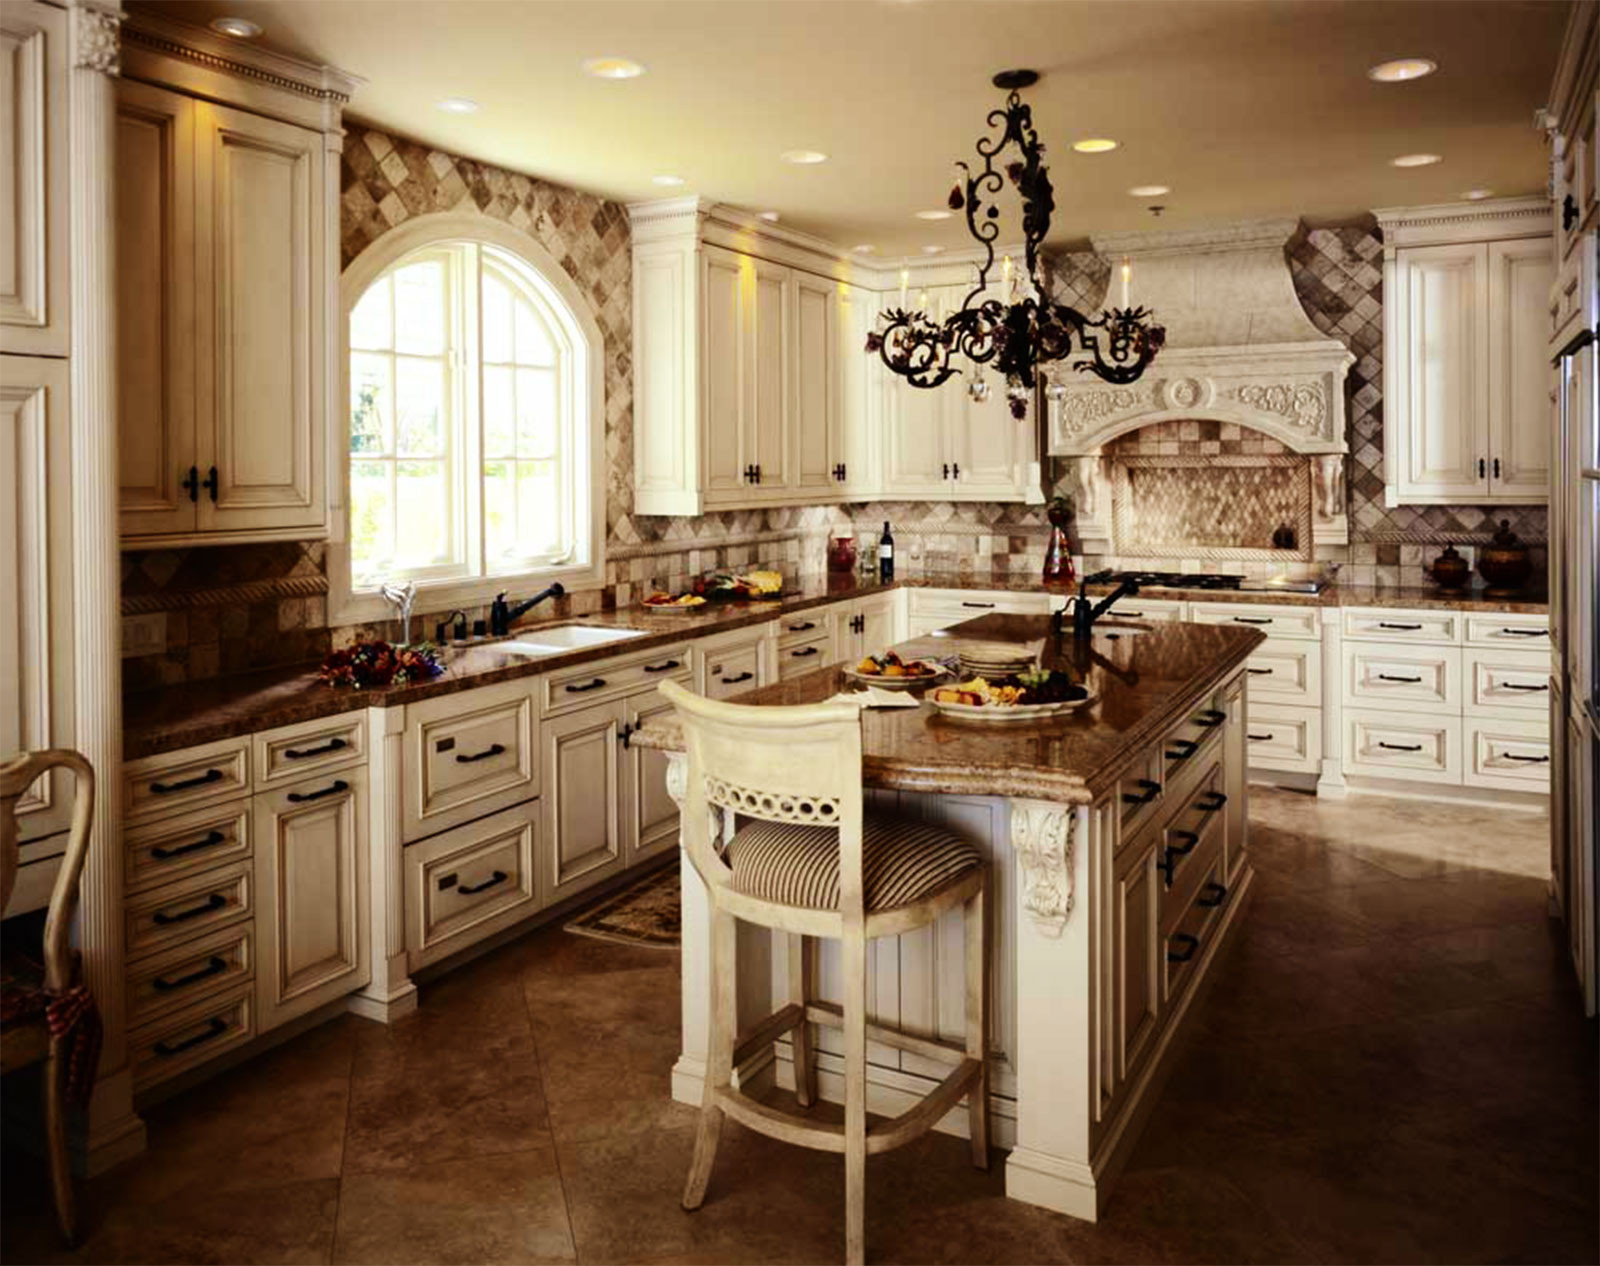 Kitchen Cabinet Rustic
 Rustic Kitchen Cabinets Country Style Kitchen Home